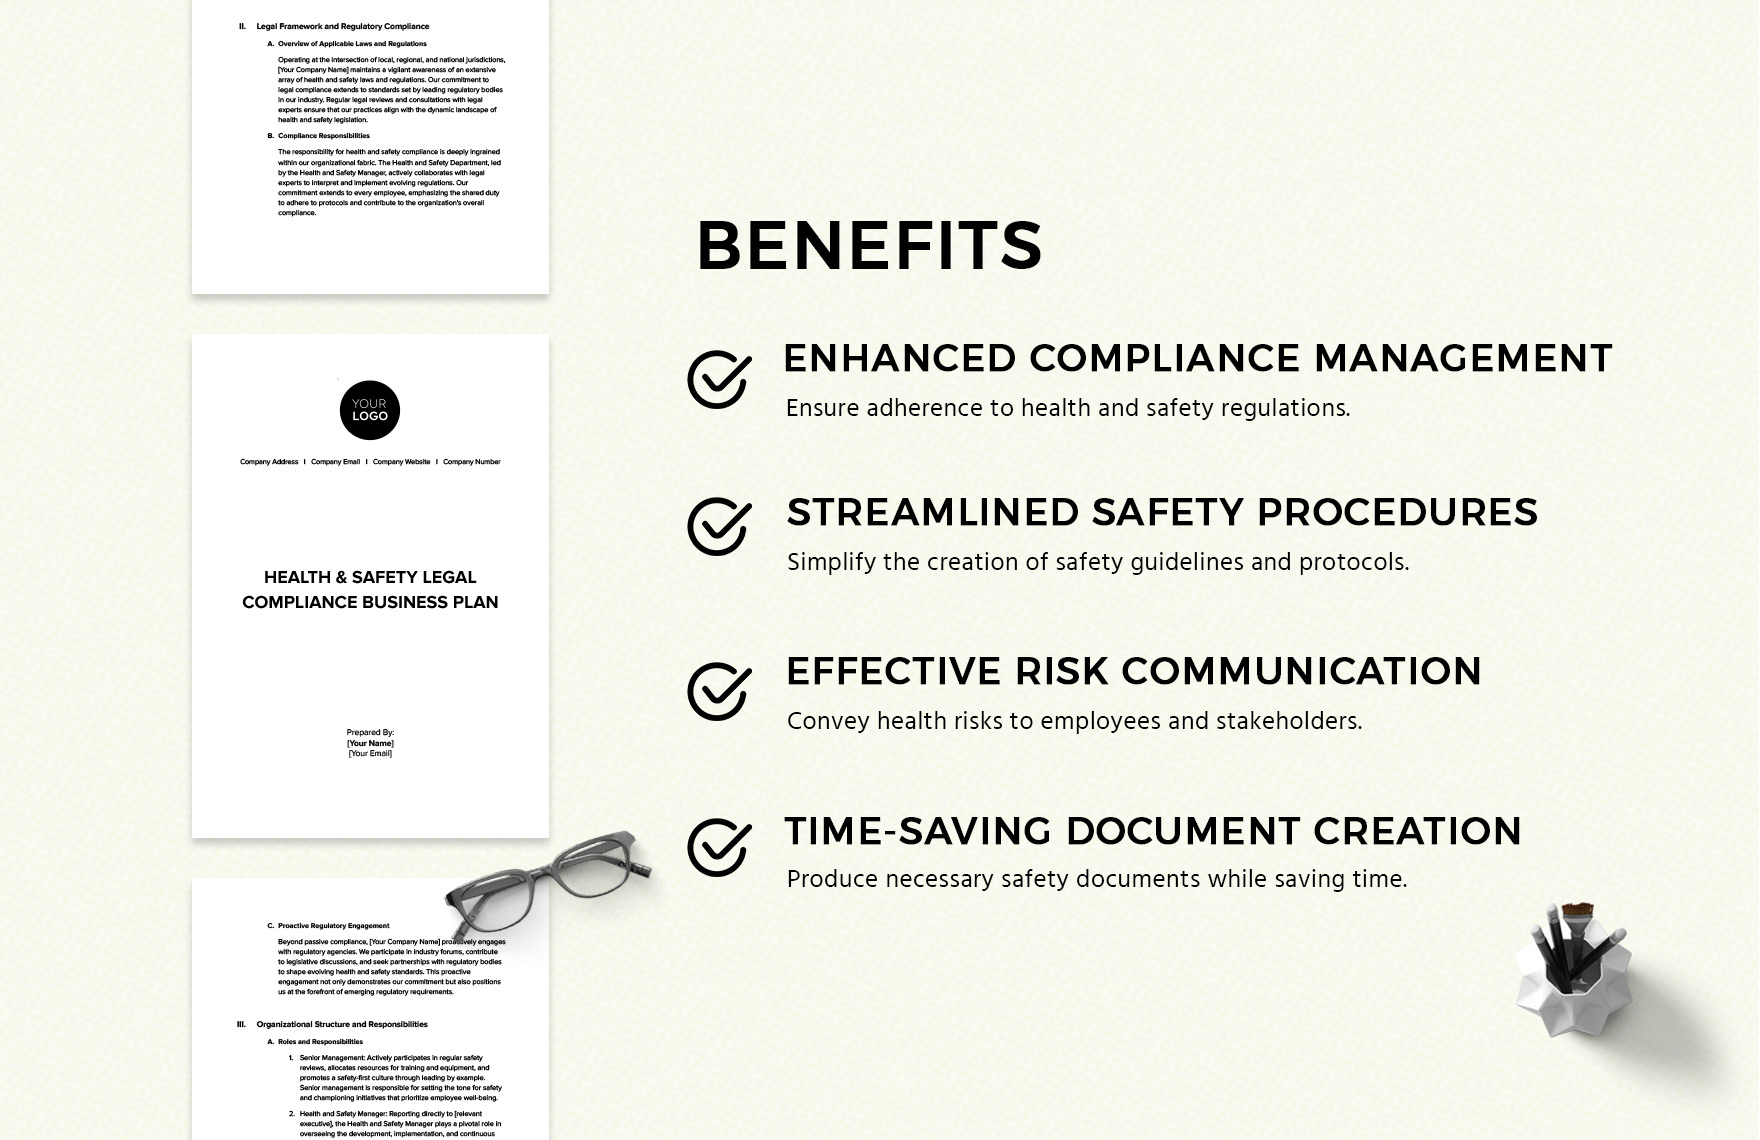 Health & Safety Legal Compliance Business Plan Template